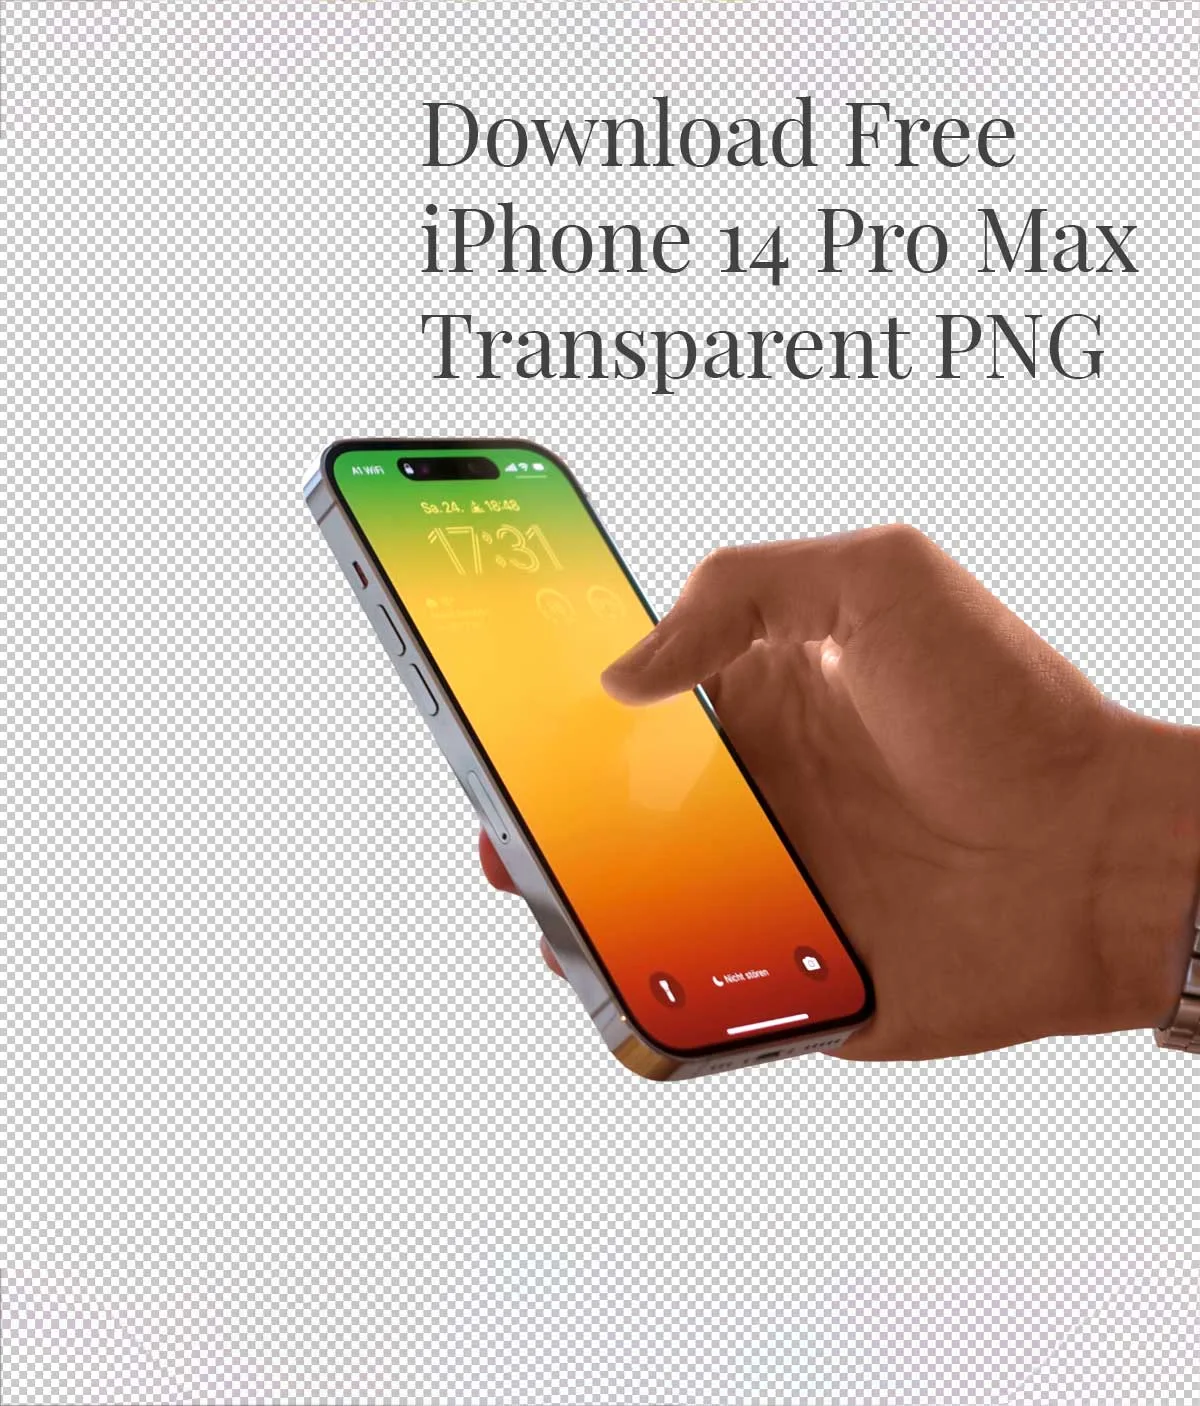 Download Free iPhone 14 Pro Max Transparent PNG